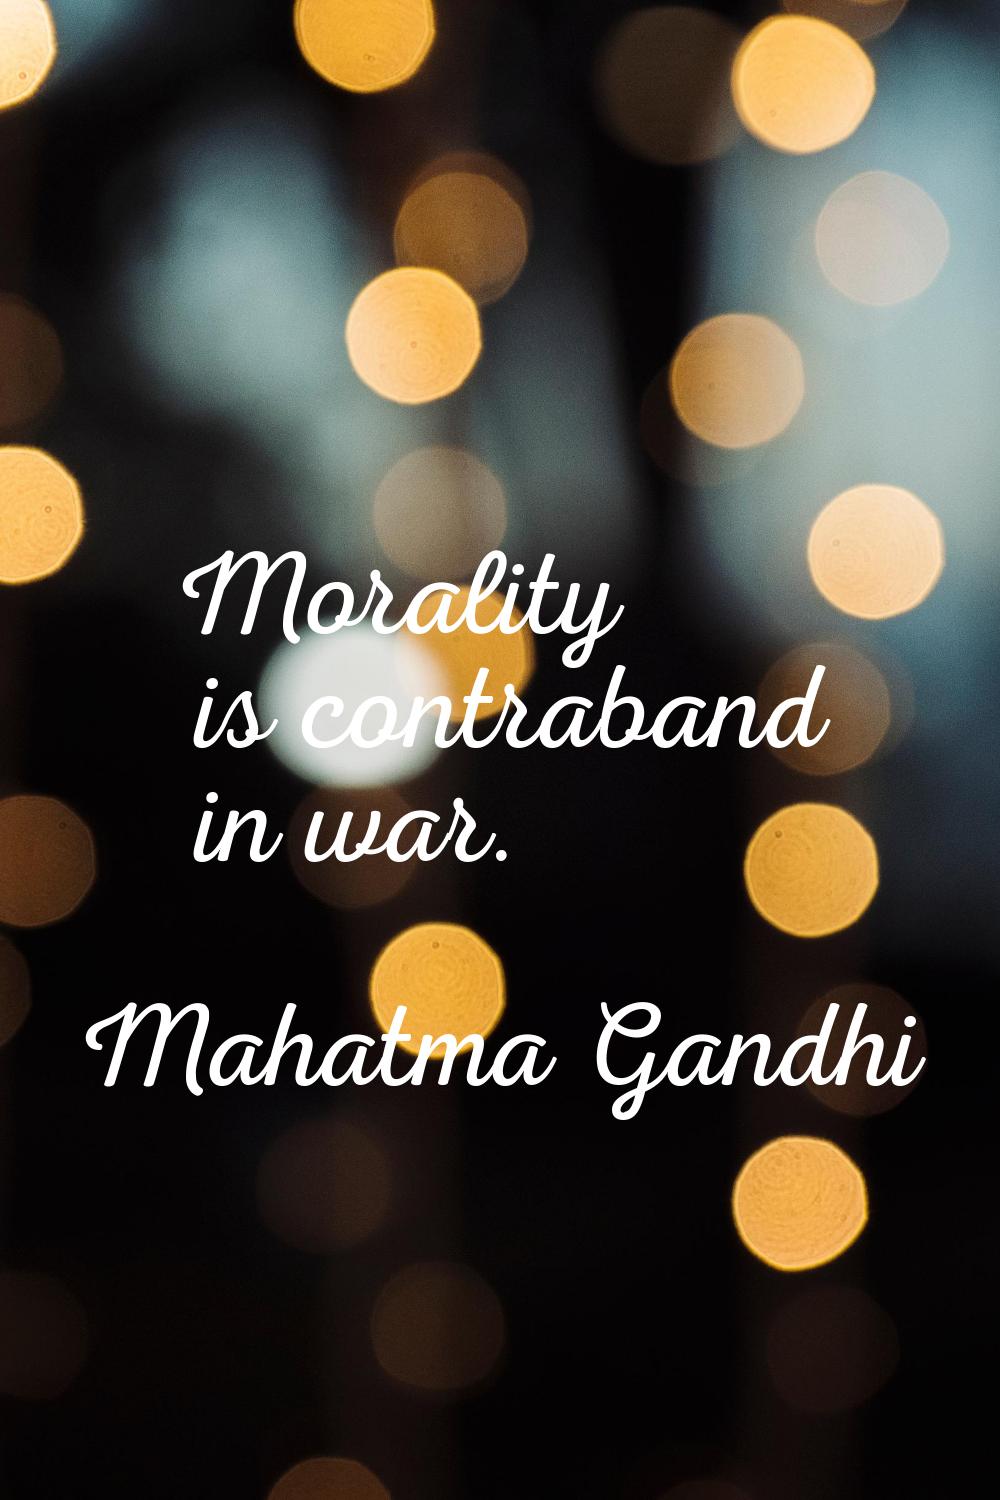 Morality is contraband in war.